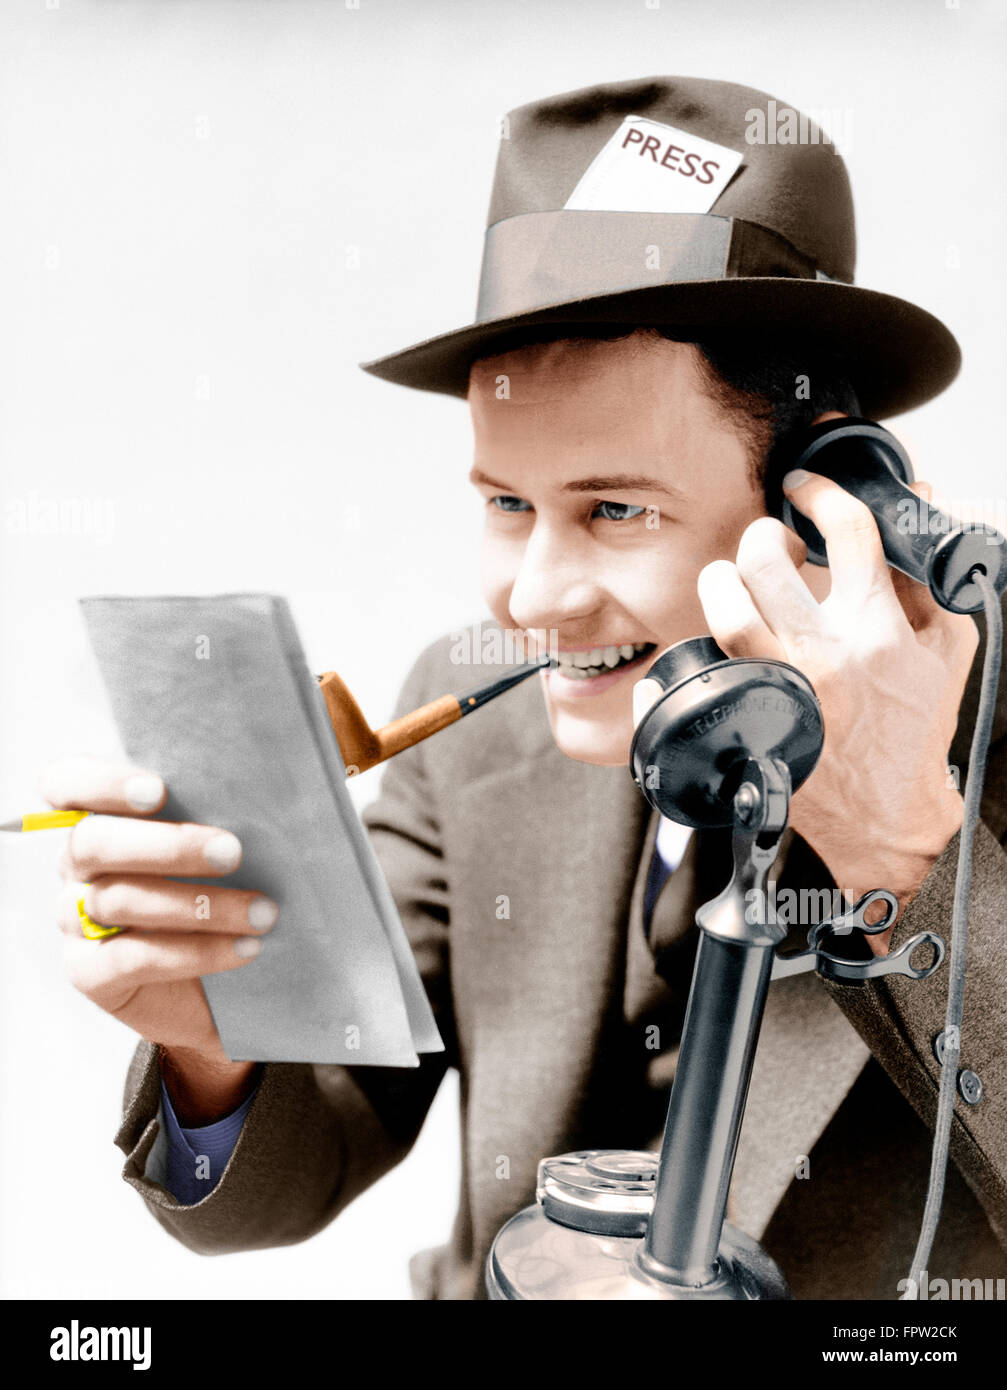 1930s EXCITED MAN NEWSPAPER REPORTER SMOKING PIPE PRESS PASS IN HAT TALKING ON UPRIGHT PHONE REPORTING STORY FROM NOTE PAD Stock Photo